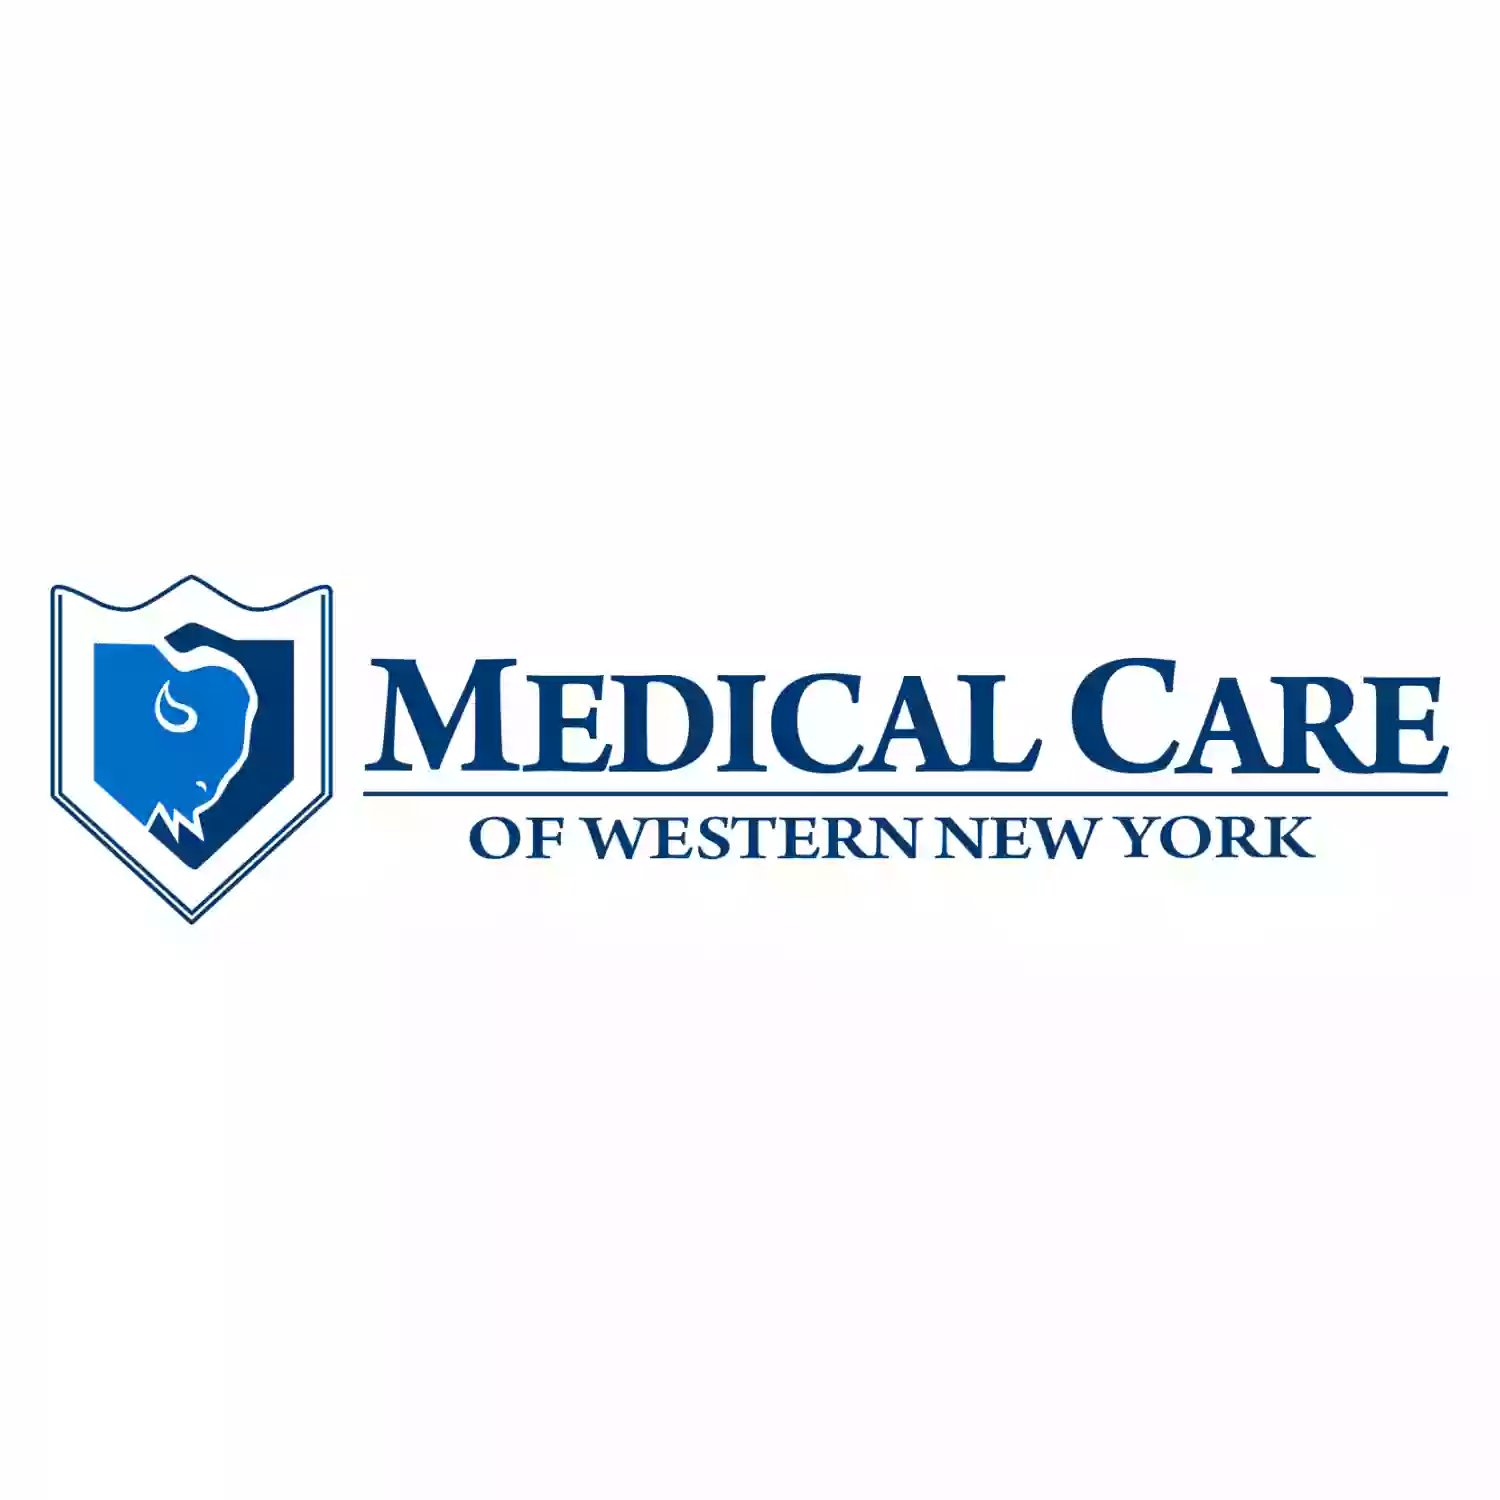 Medical Care of Western New York